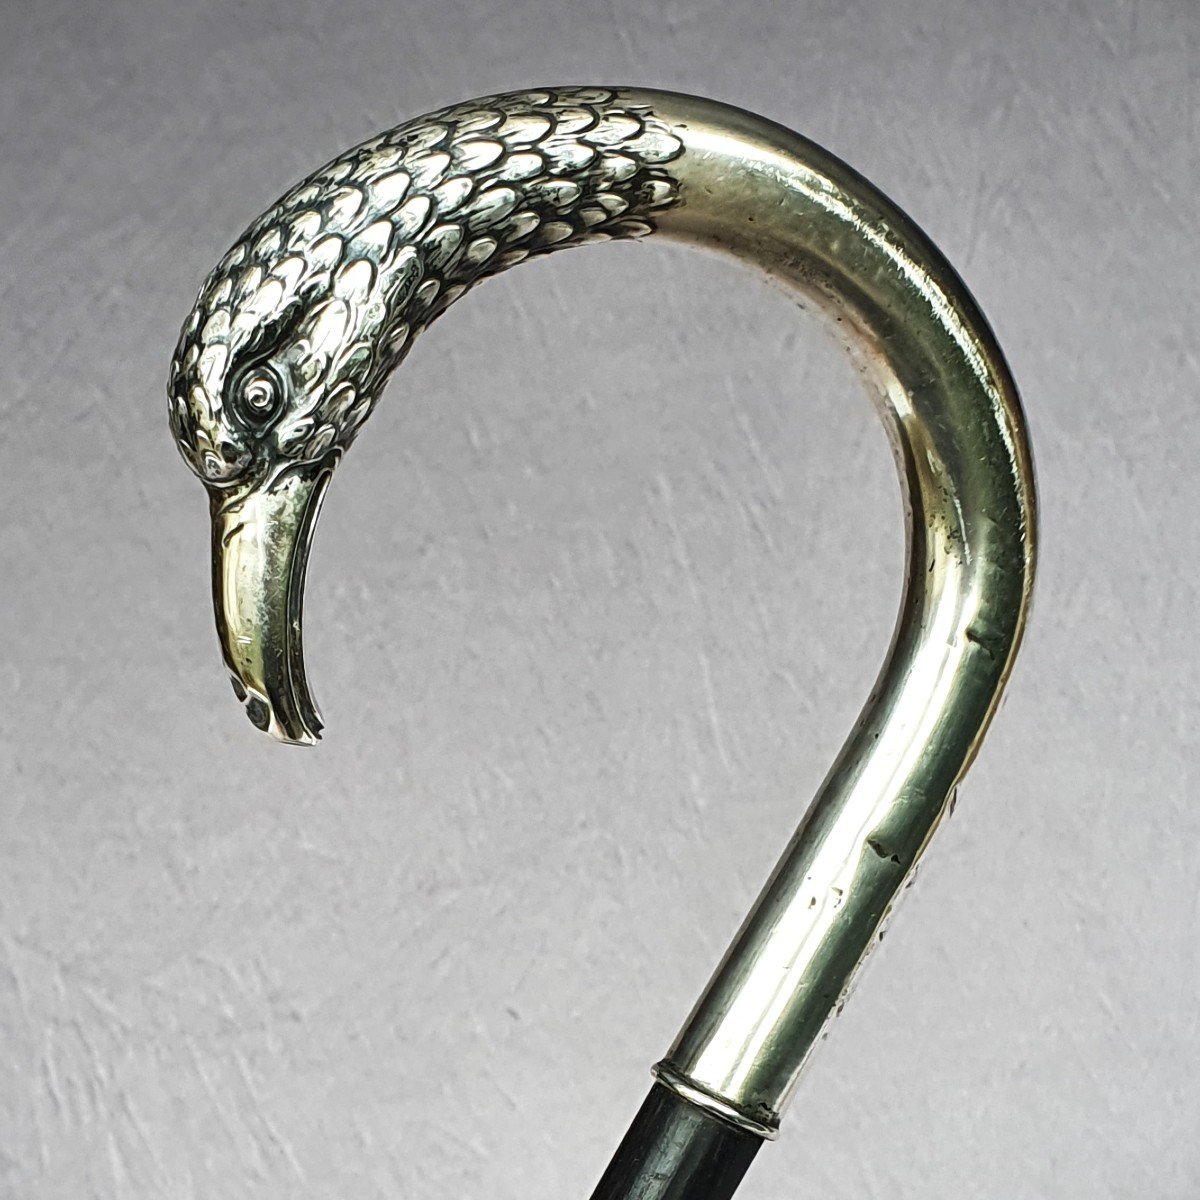 Silver Handle Cane Decorated With A Superb Bird's Head